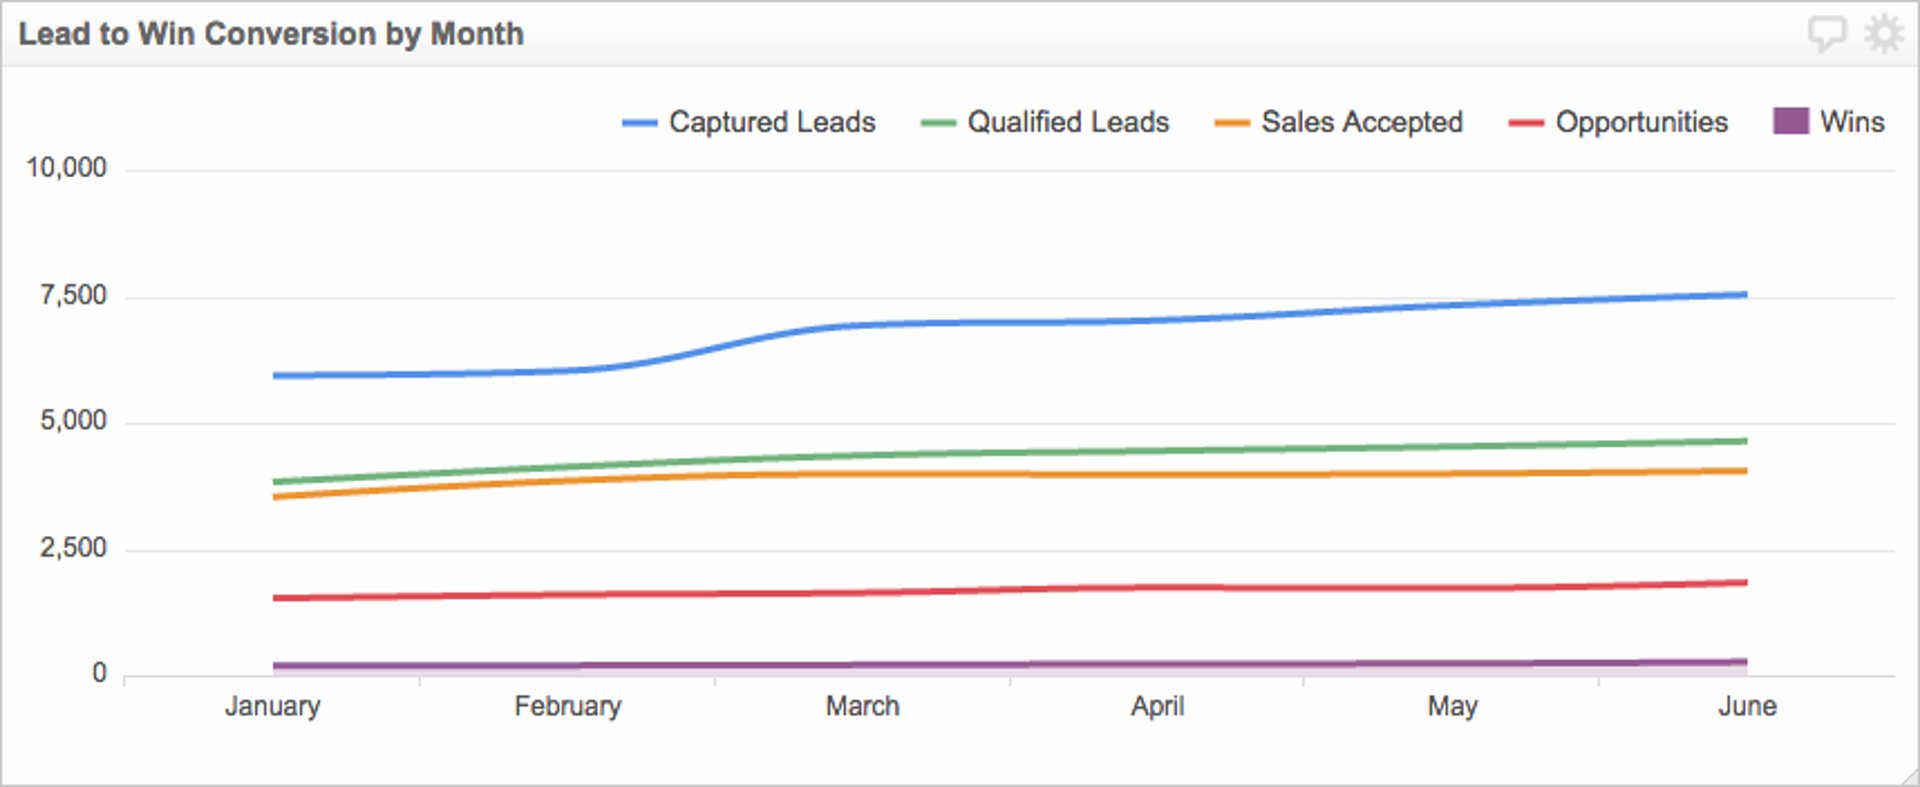 Lead to Win Conversion Rate Monthly